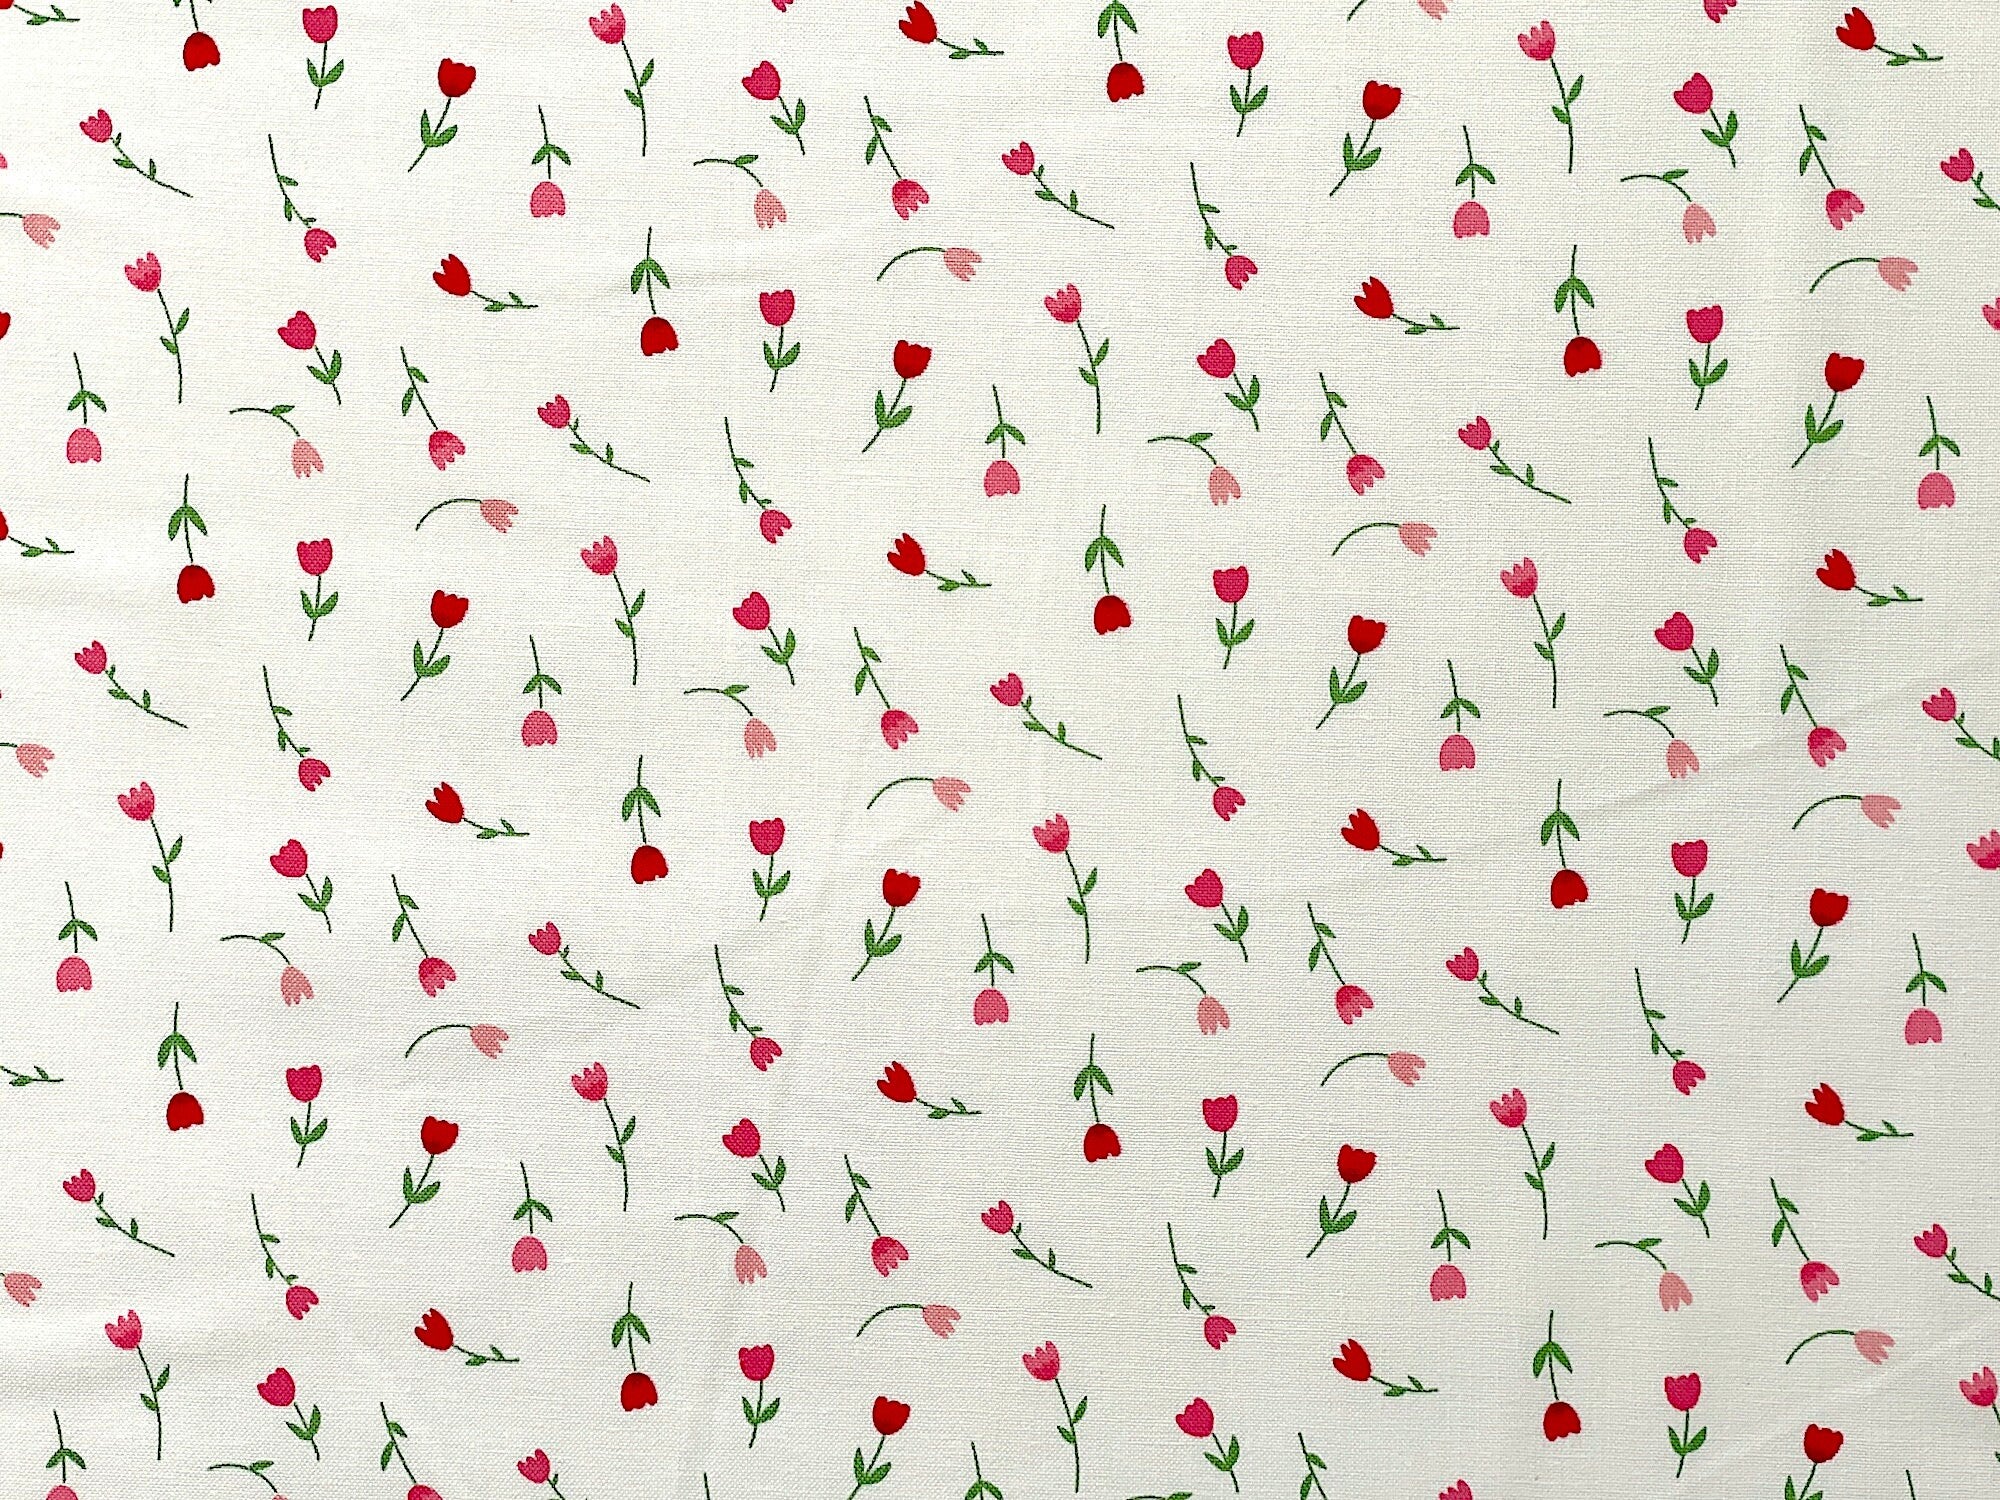 Falling In Love by Dani Mogstad for Riley Blake Designs. This fabric features red and pink tulips on a white background.